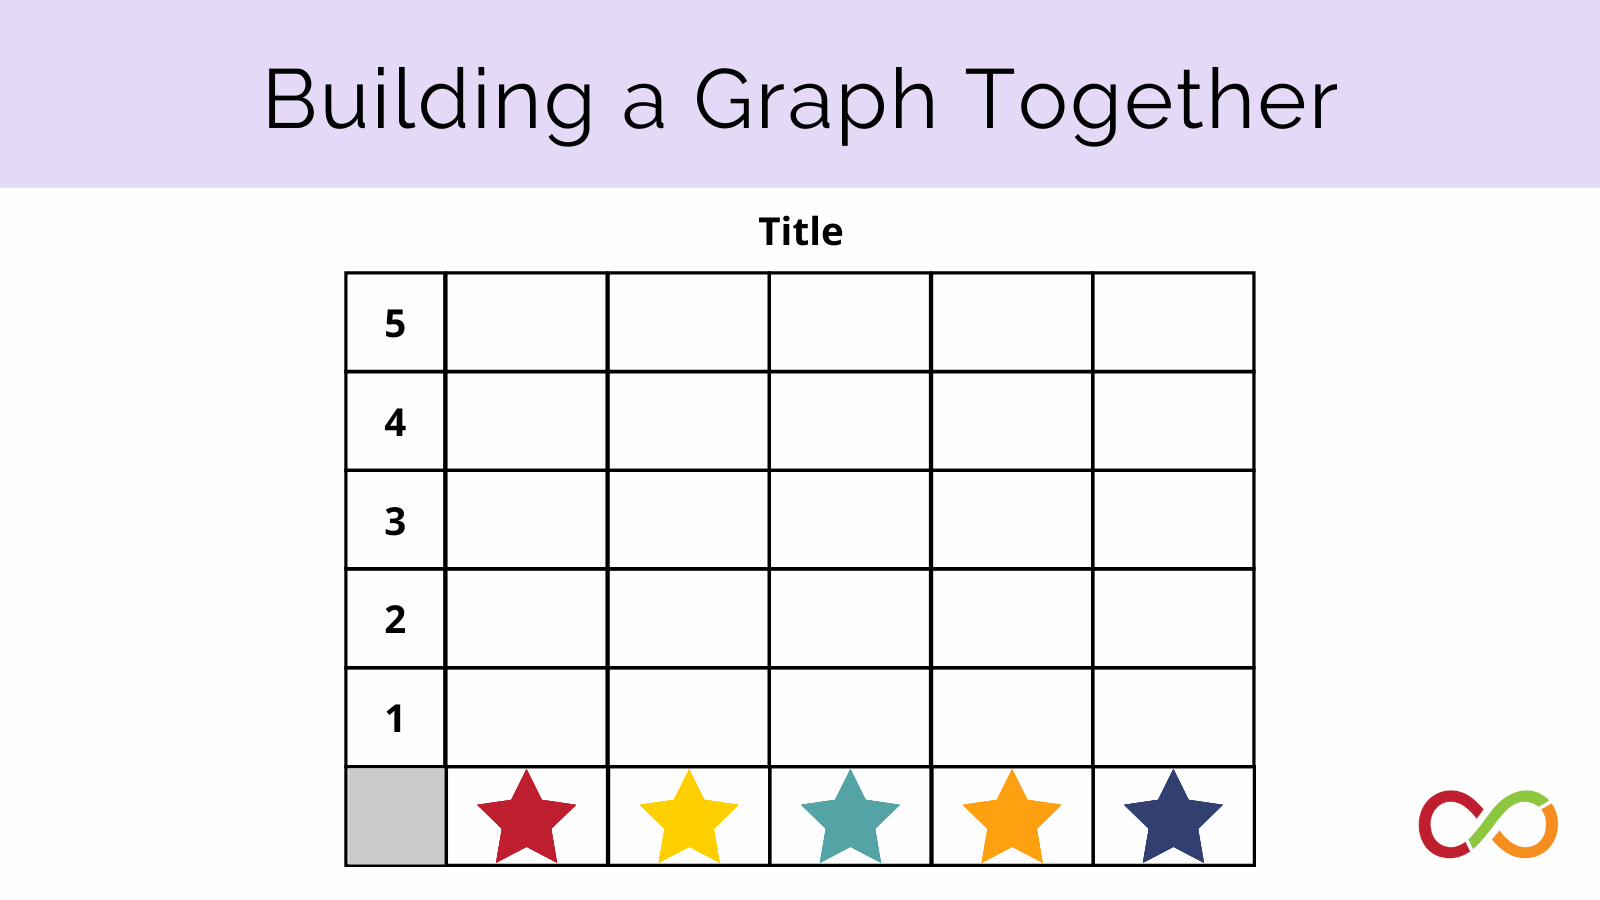 An image linking to the building a graph together lesson